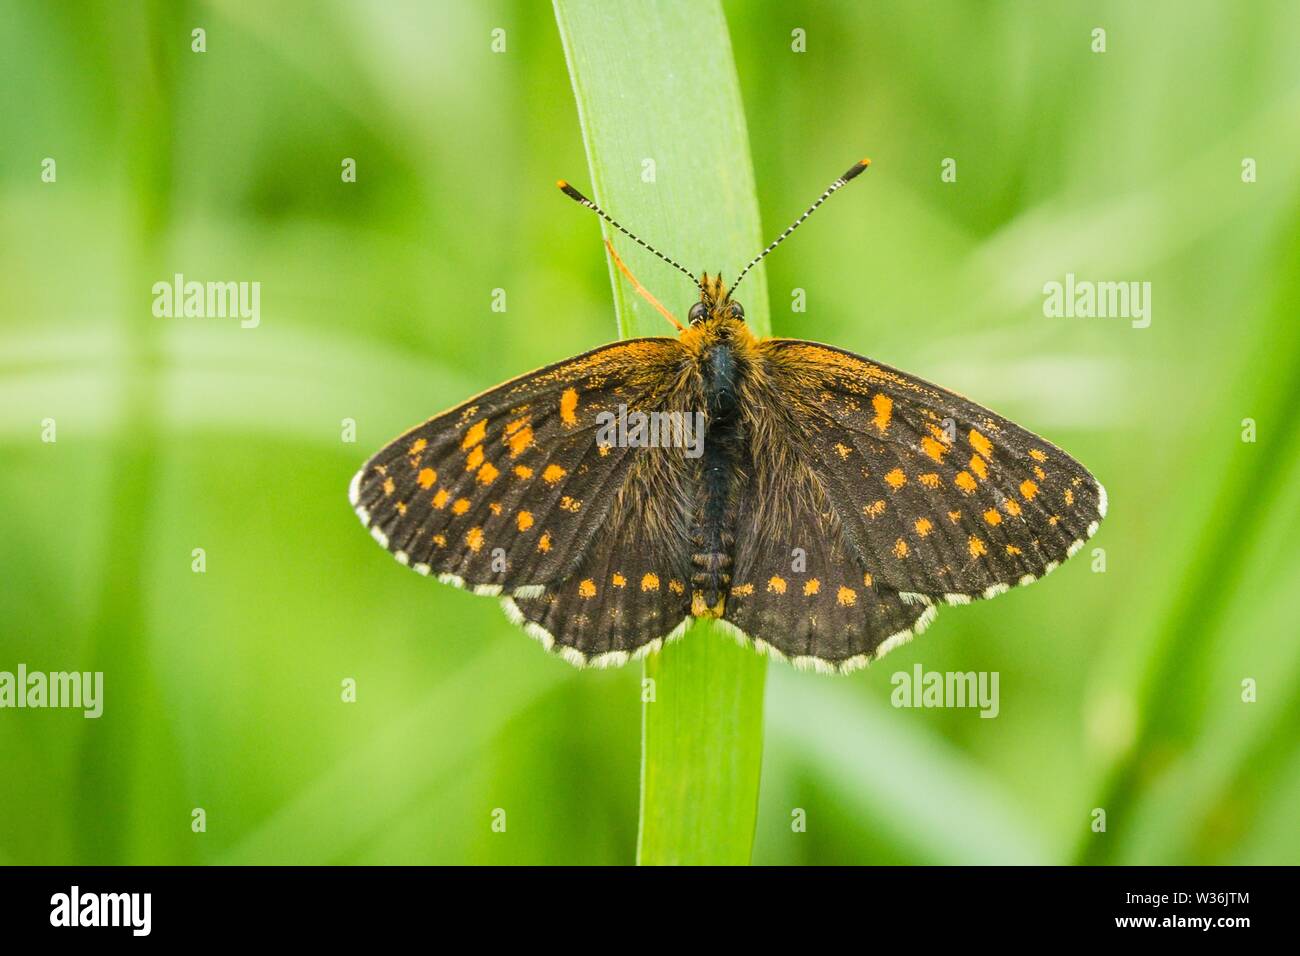 Top view of brown and orange spotted butterfly, false heath fritillary, an endangered species, sitting on green grass. Blurry background. Stock Photo